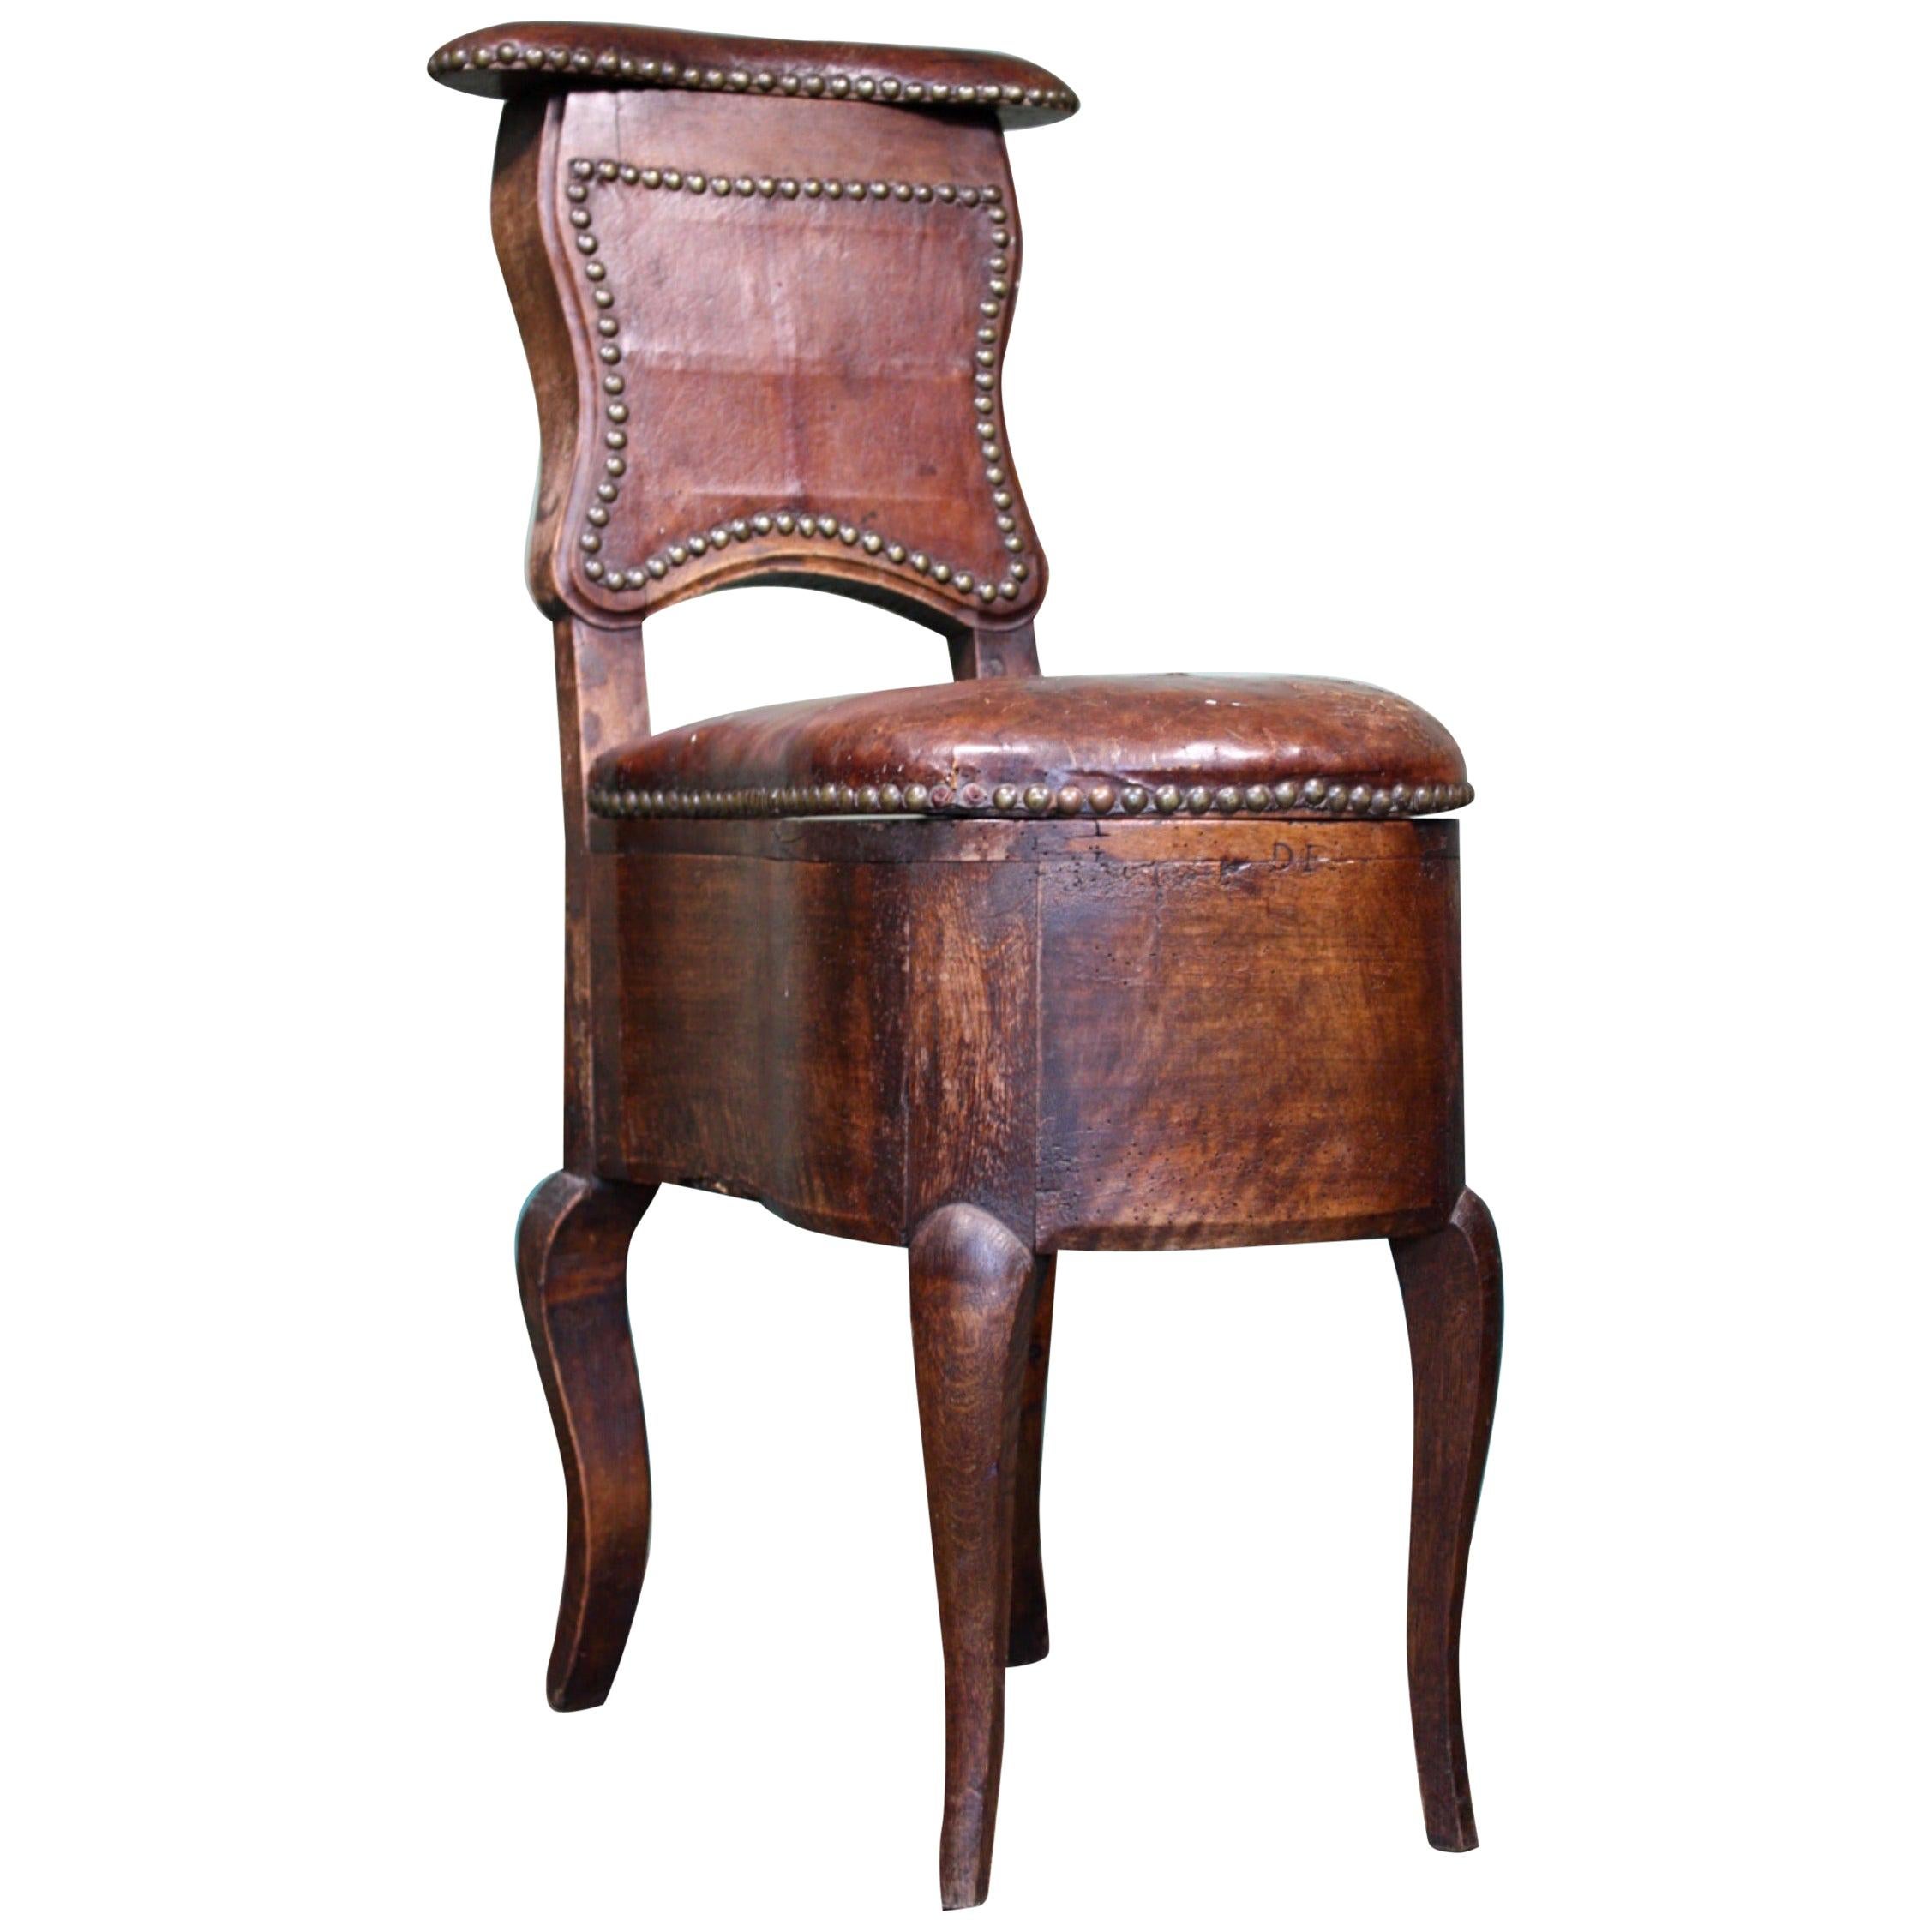 Unusual Early 19th Century French Oak and Leather Desk Chair